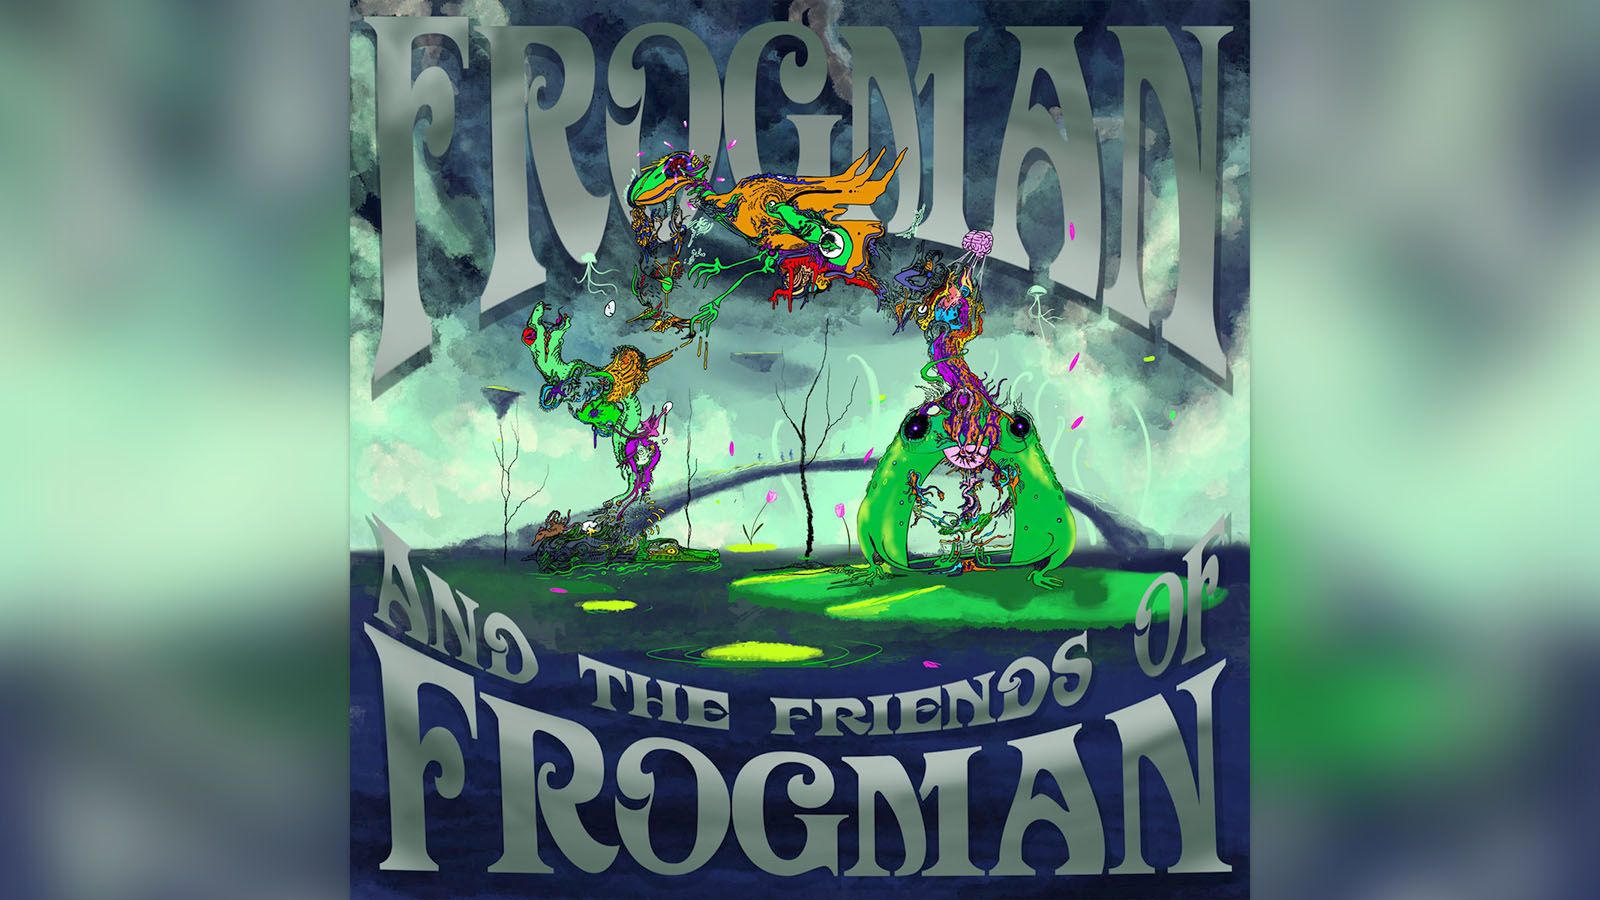 Frogman and The Friends of Frogman will get you hopping.